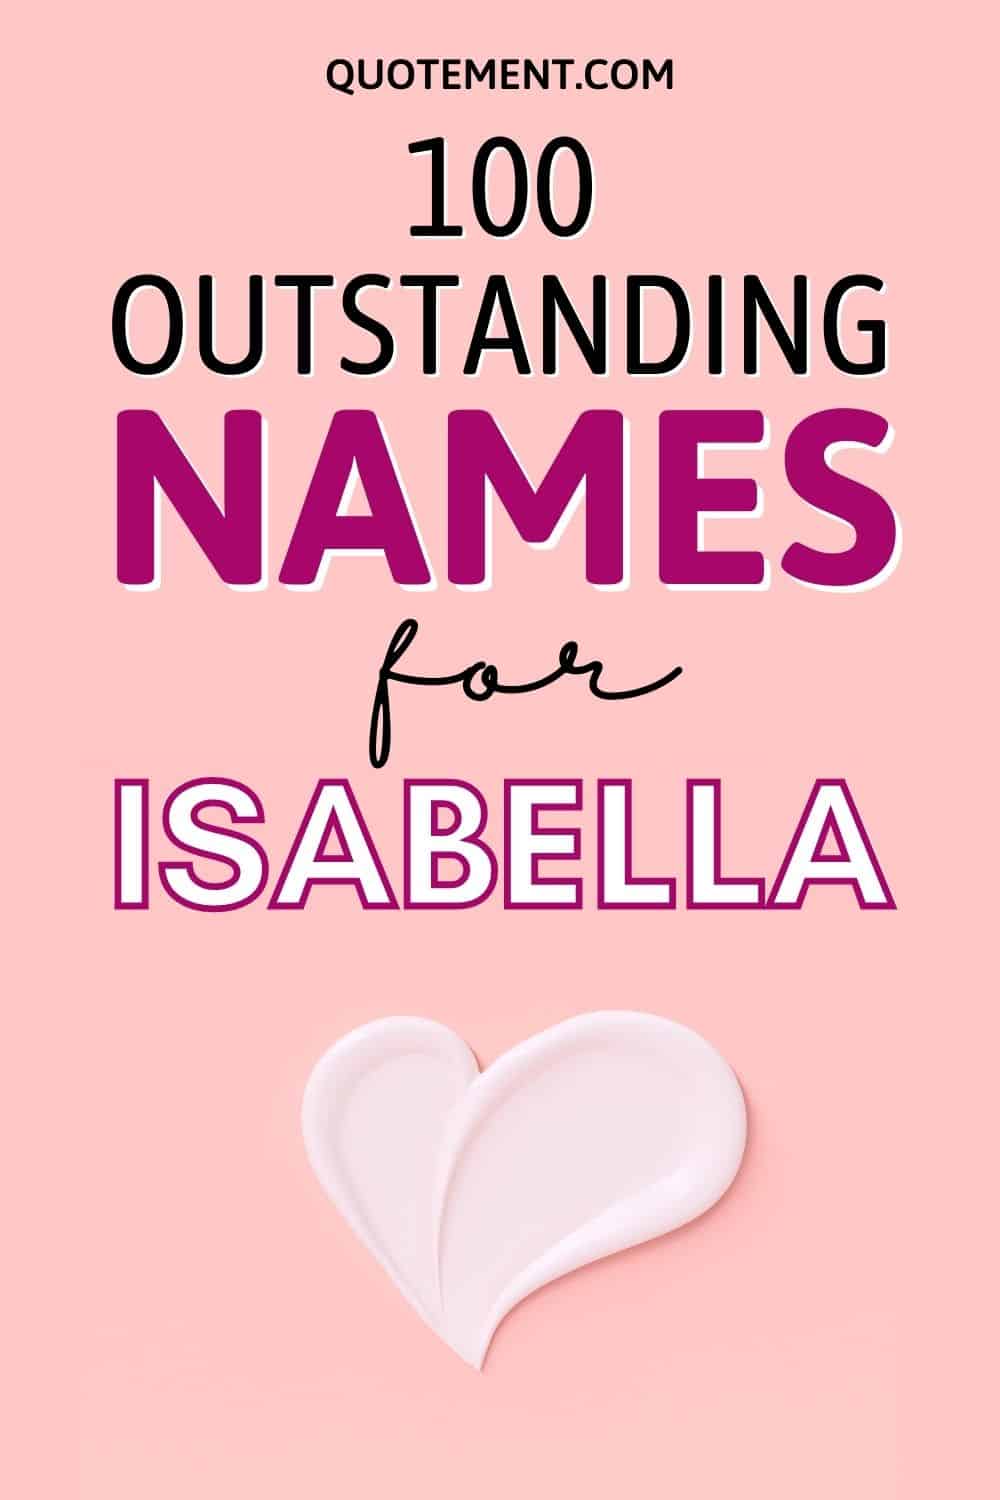 100 Pretty Nicknames For Isabella You’ll Fall In Love With